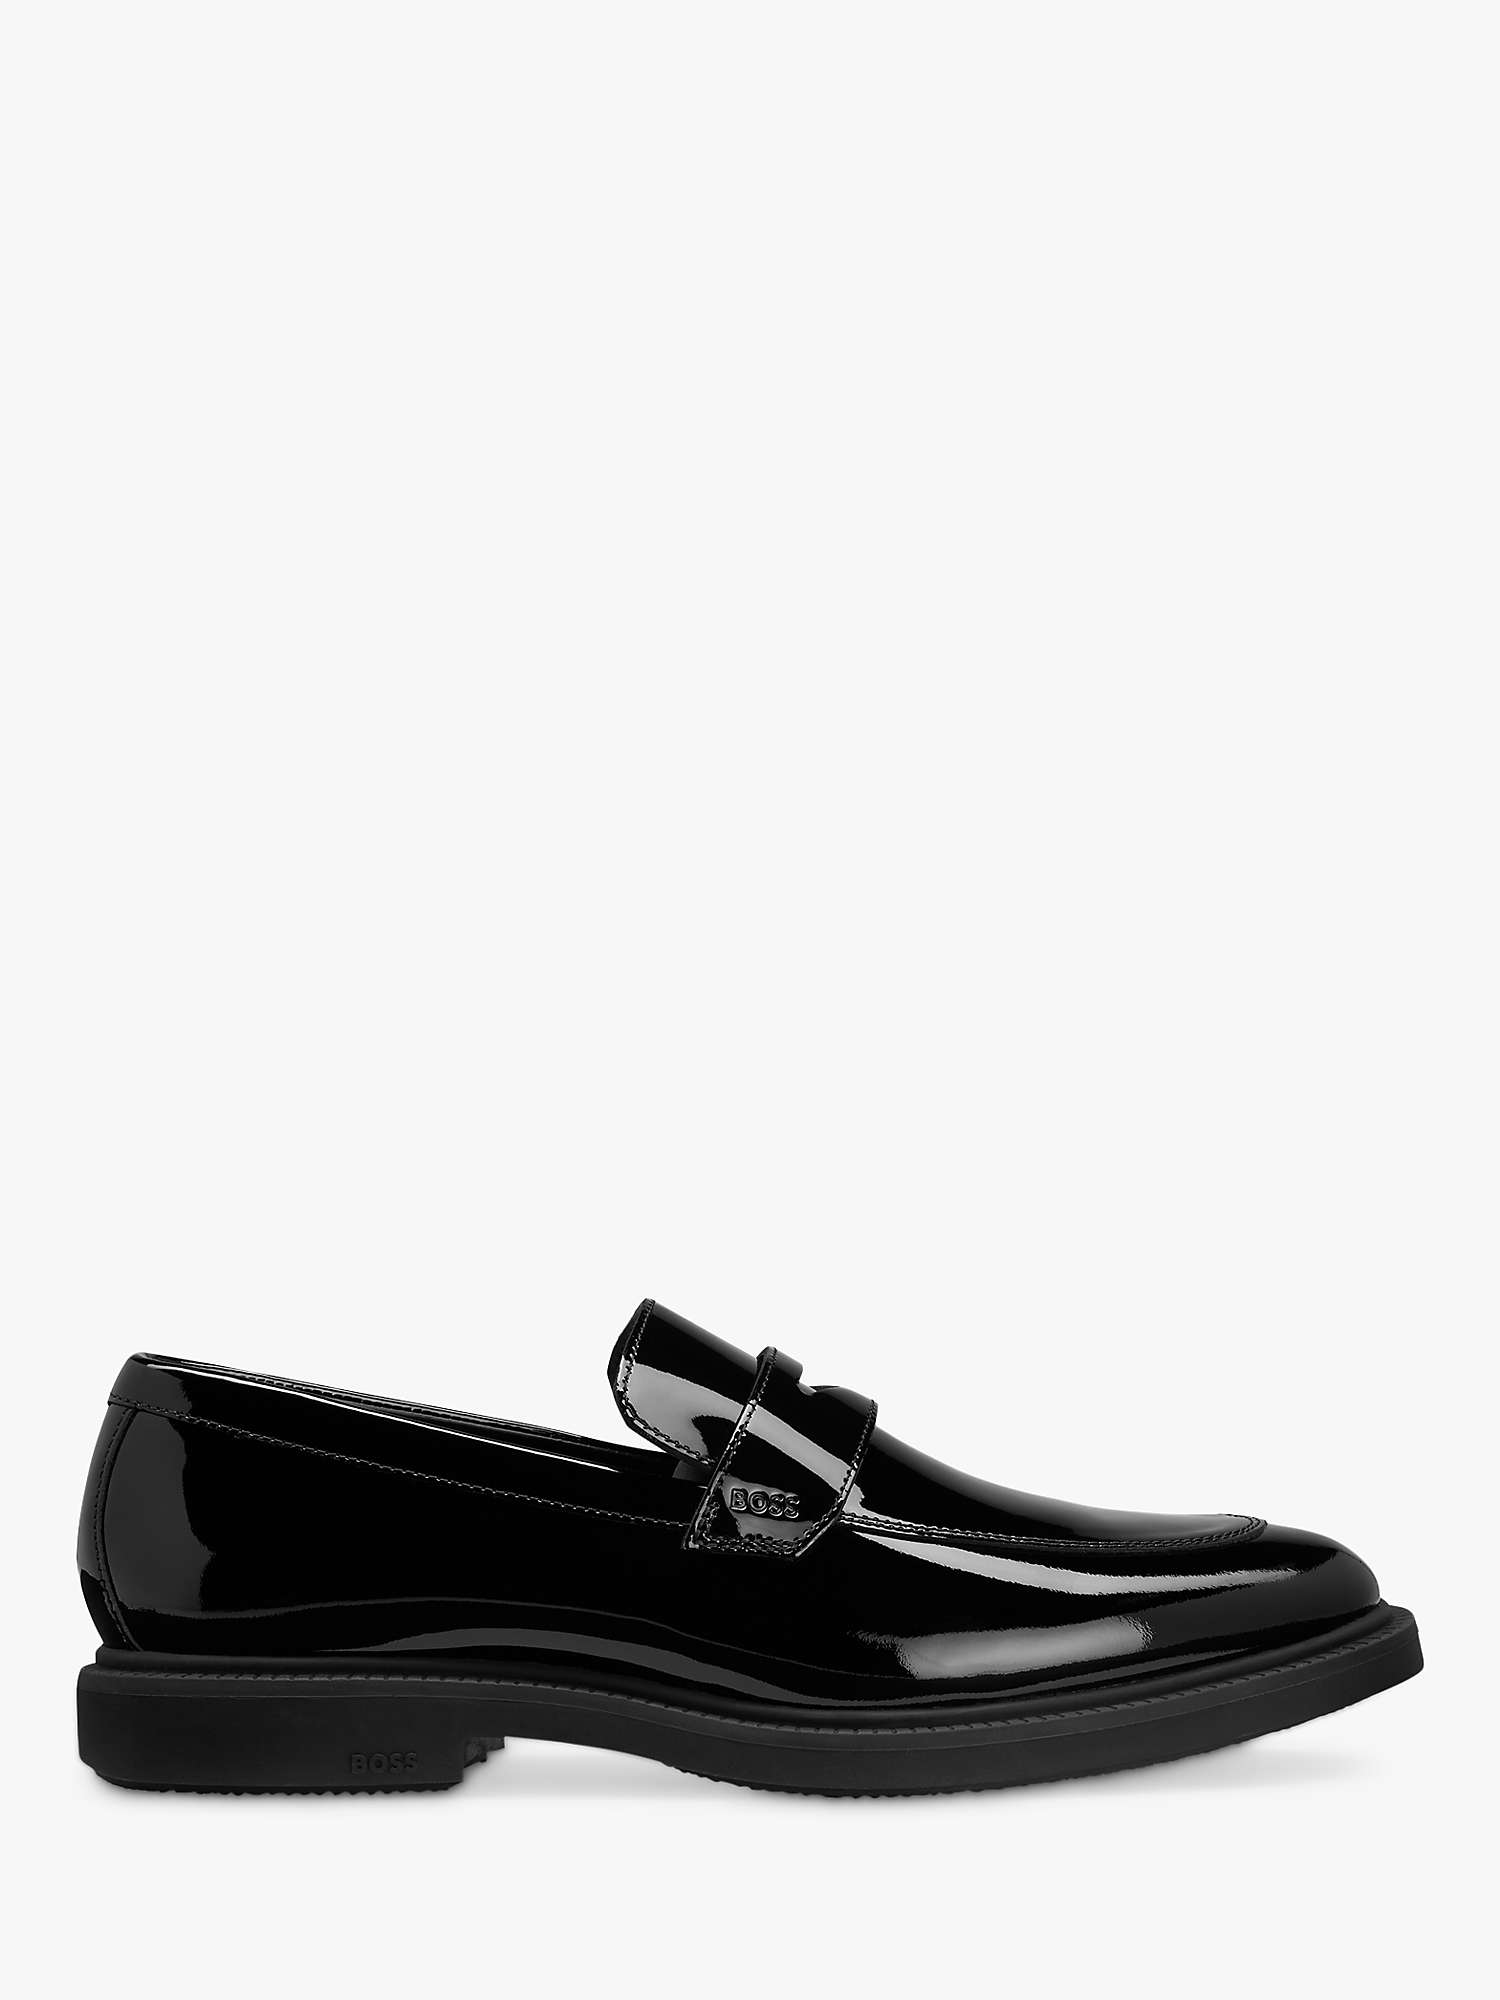 BOSS Larry Penny Leather Loafers, Black at John Lewis & Partners